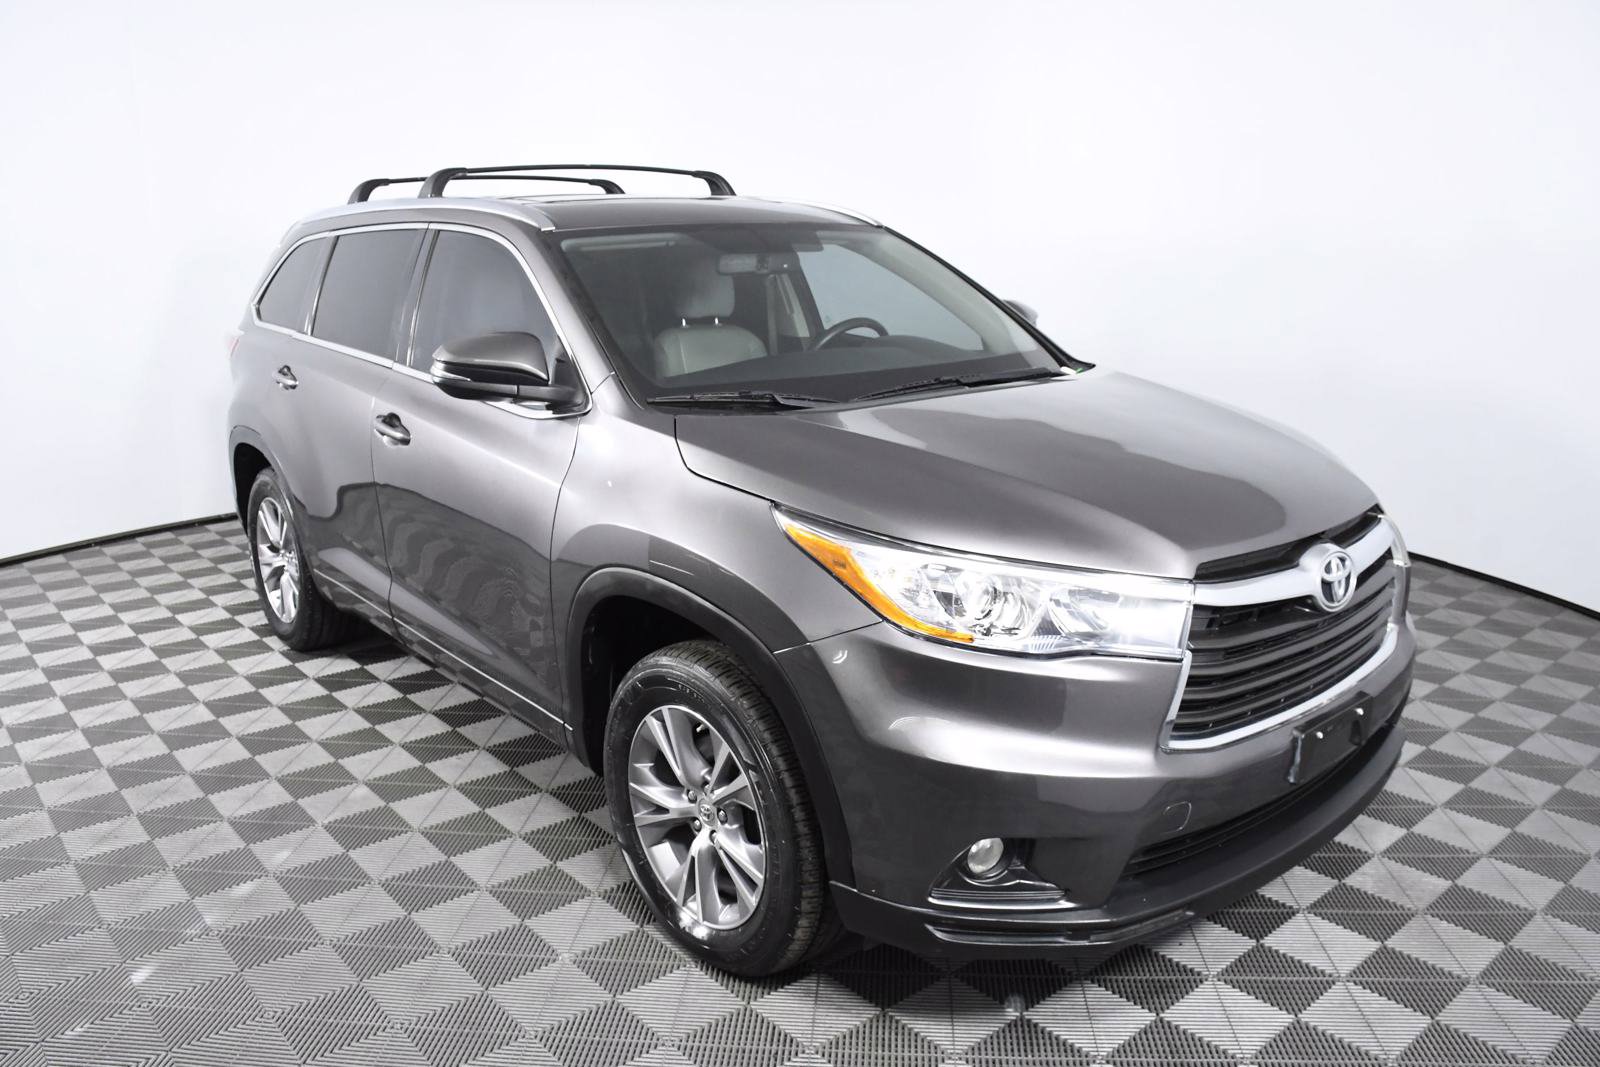 Pre-Owned 2015 Toyota Highlander XLE V6 Sport Utility in Palmetto Bay  #342492 | HGreg Nissan Kendall